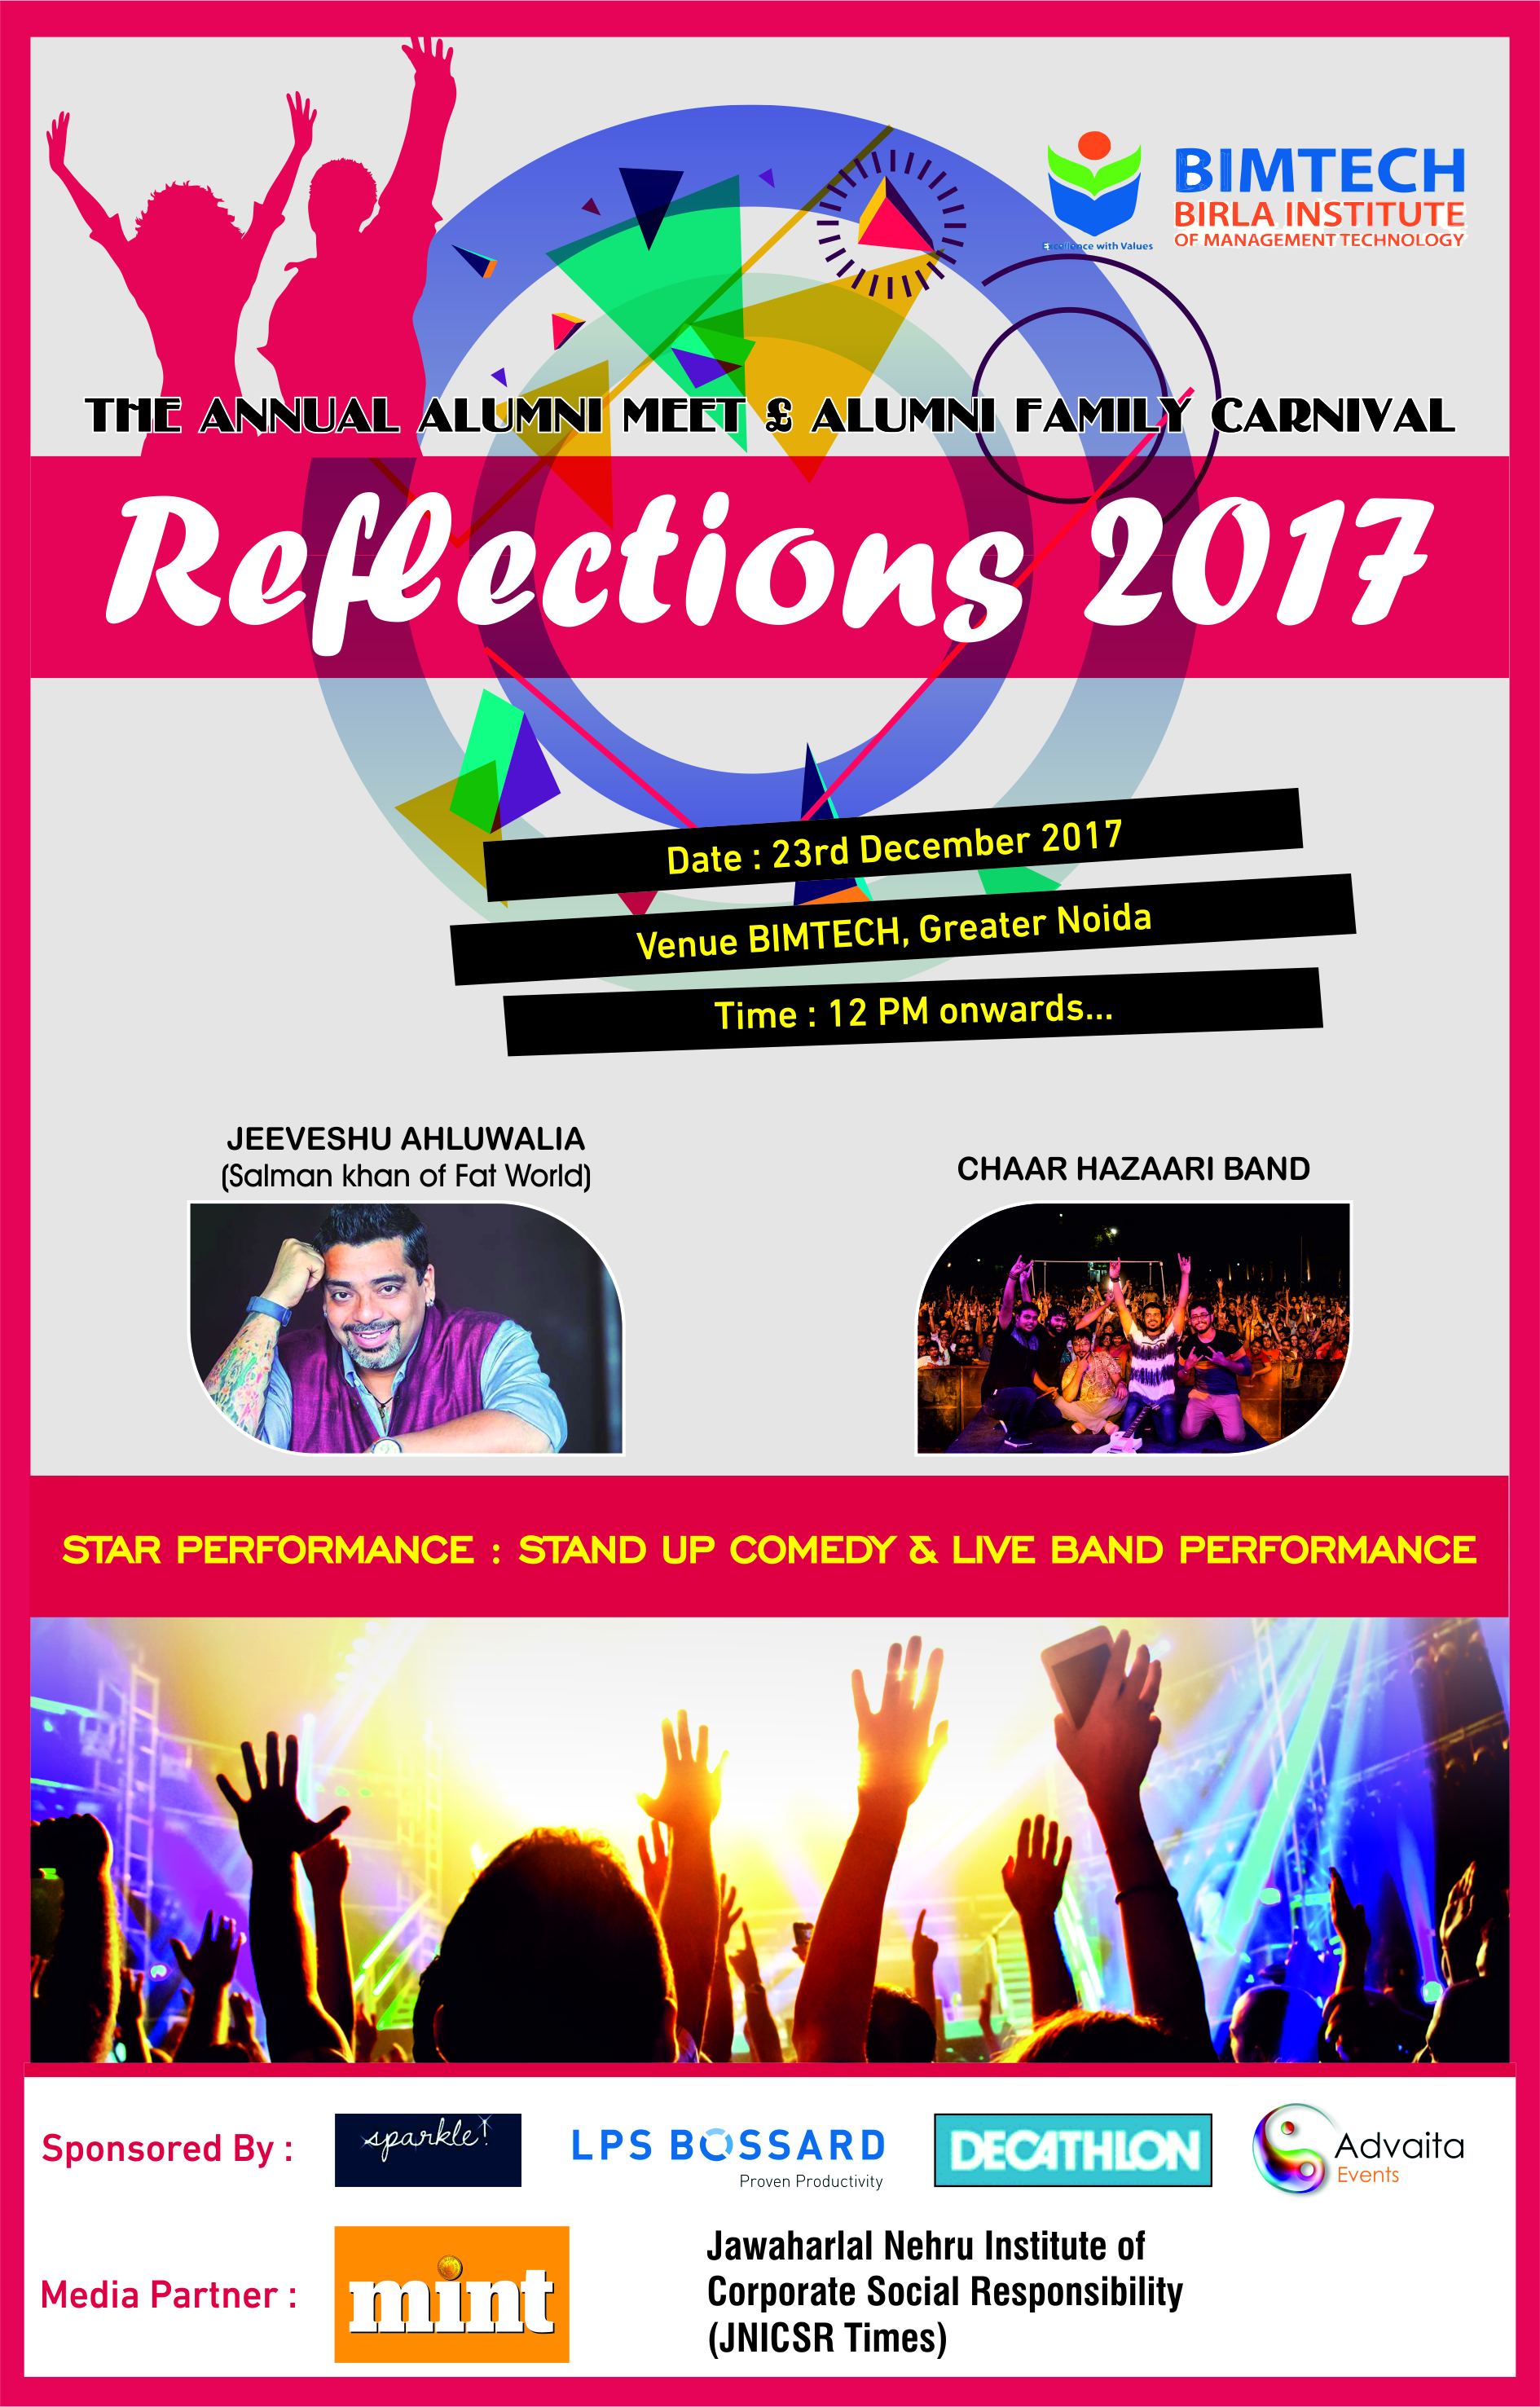 Birla Institute of Management Technology will host the super special Annual Alumni meet and Carnival, ’Reflections 2017‘ on December 23, 2017.